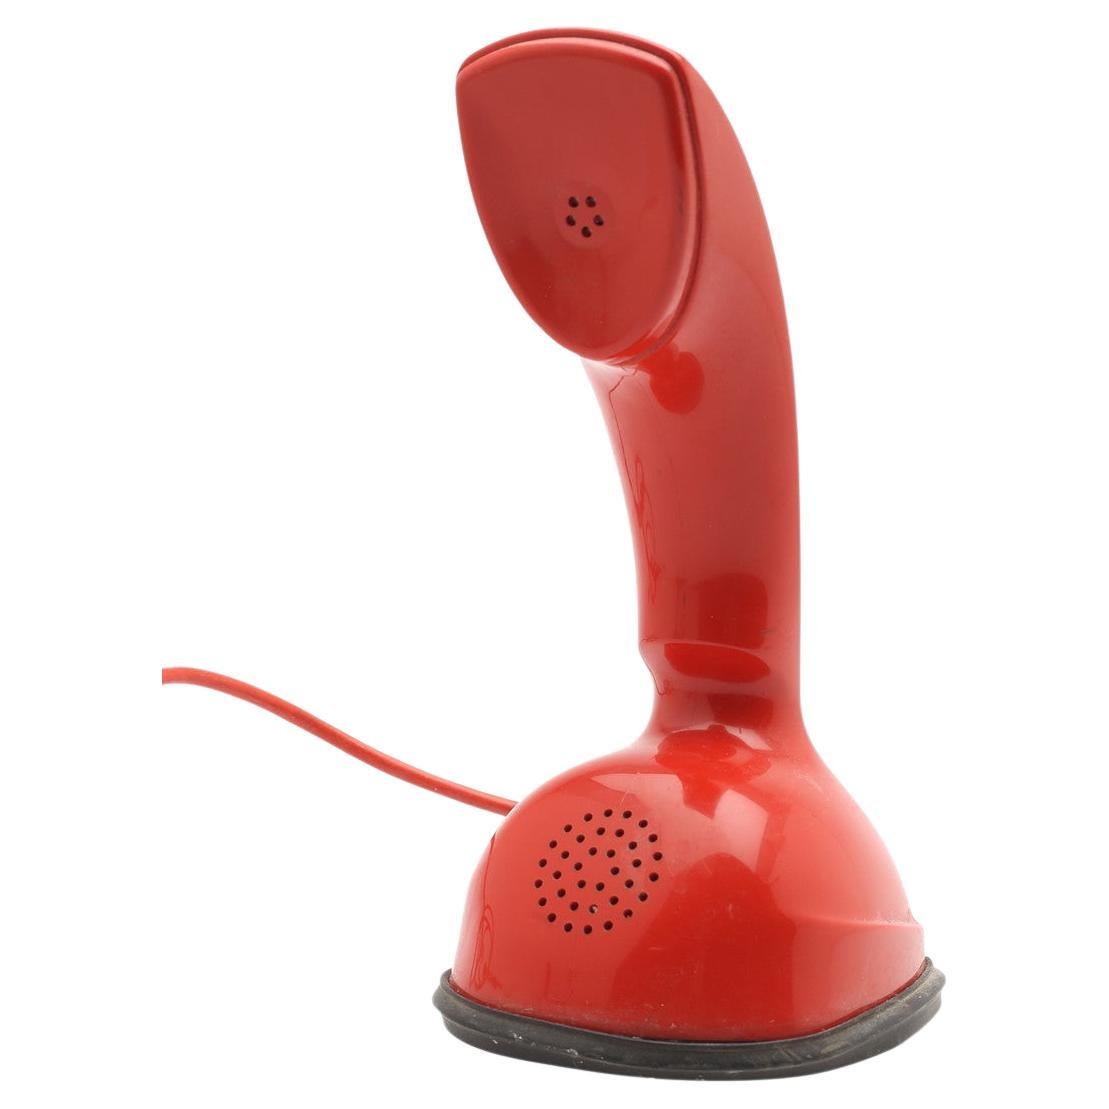 Red Cobra Table Phone, Ericofon by LM Ericsson